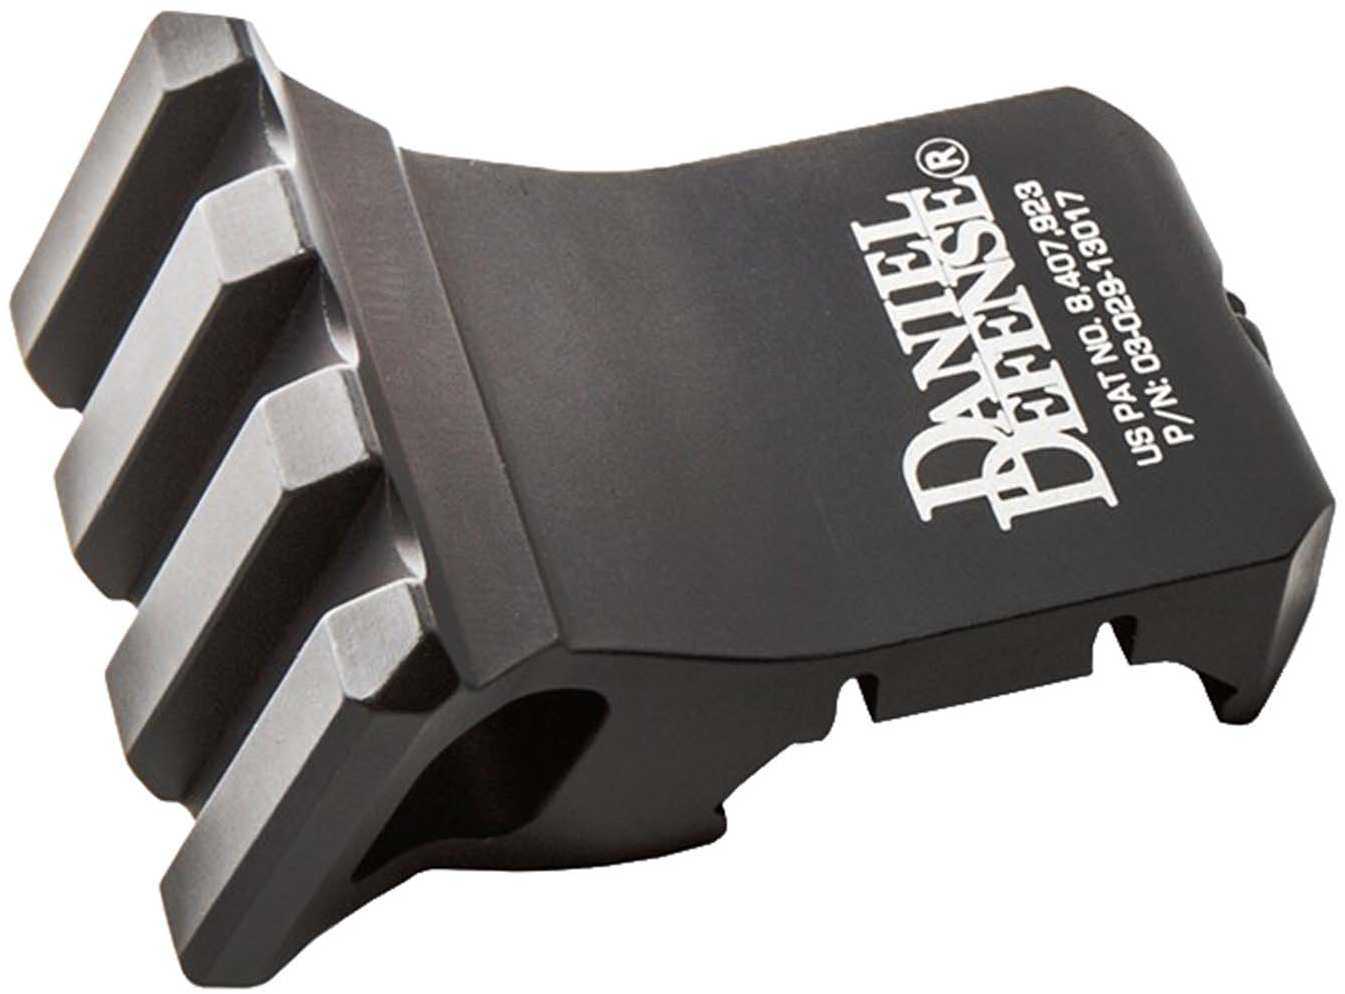 Daniel Defense 1 Oclock Offset Rail Mounts accessories in 5 7 or 11 o-clock positions - to MIL-STD-19 DD-15000